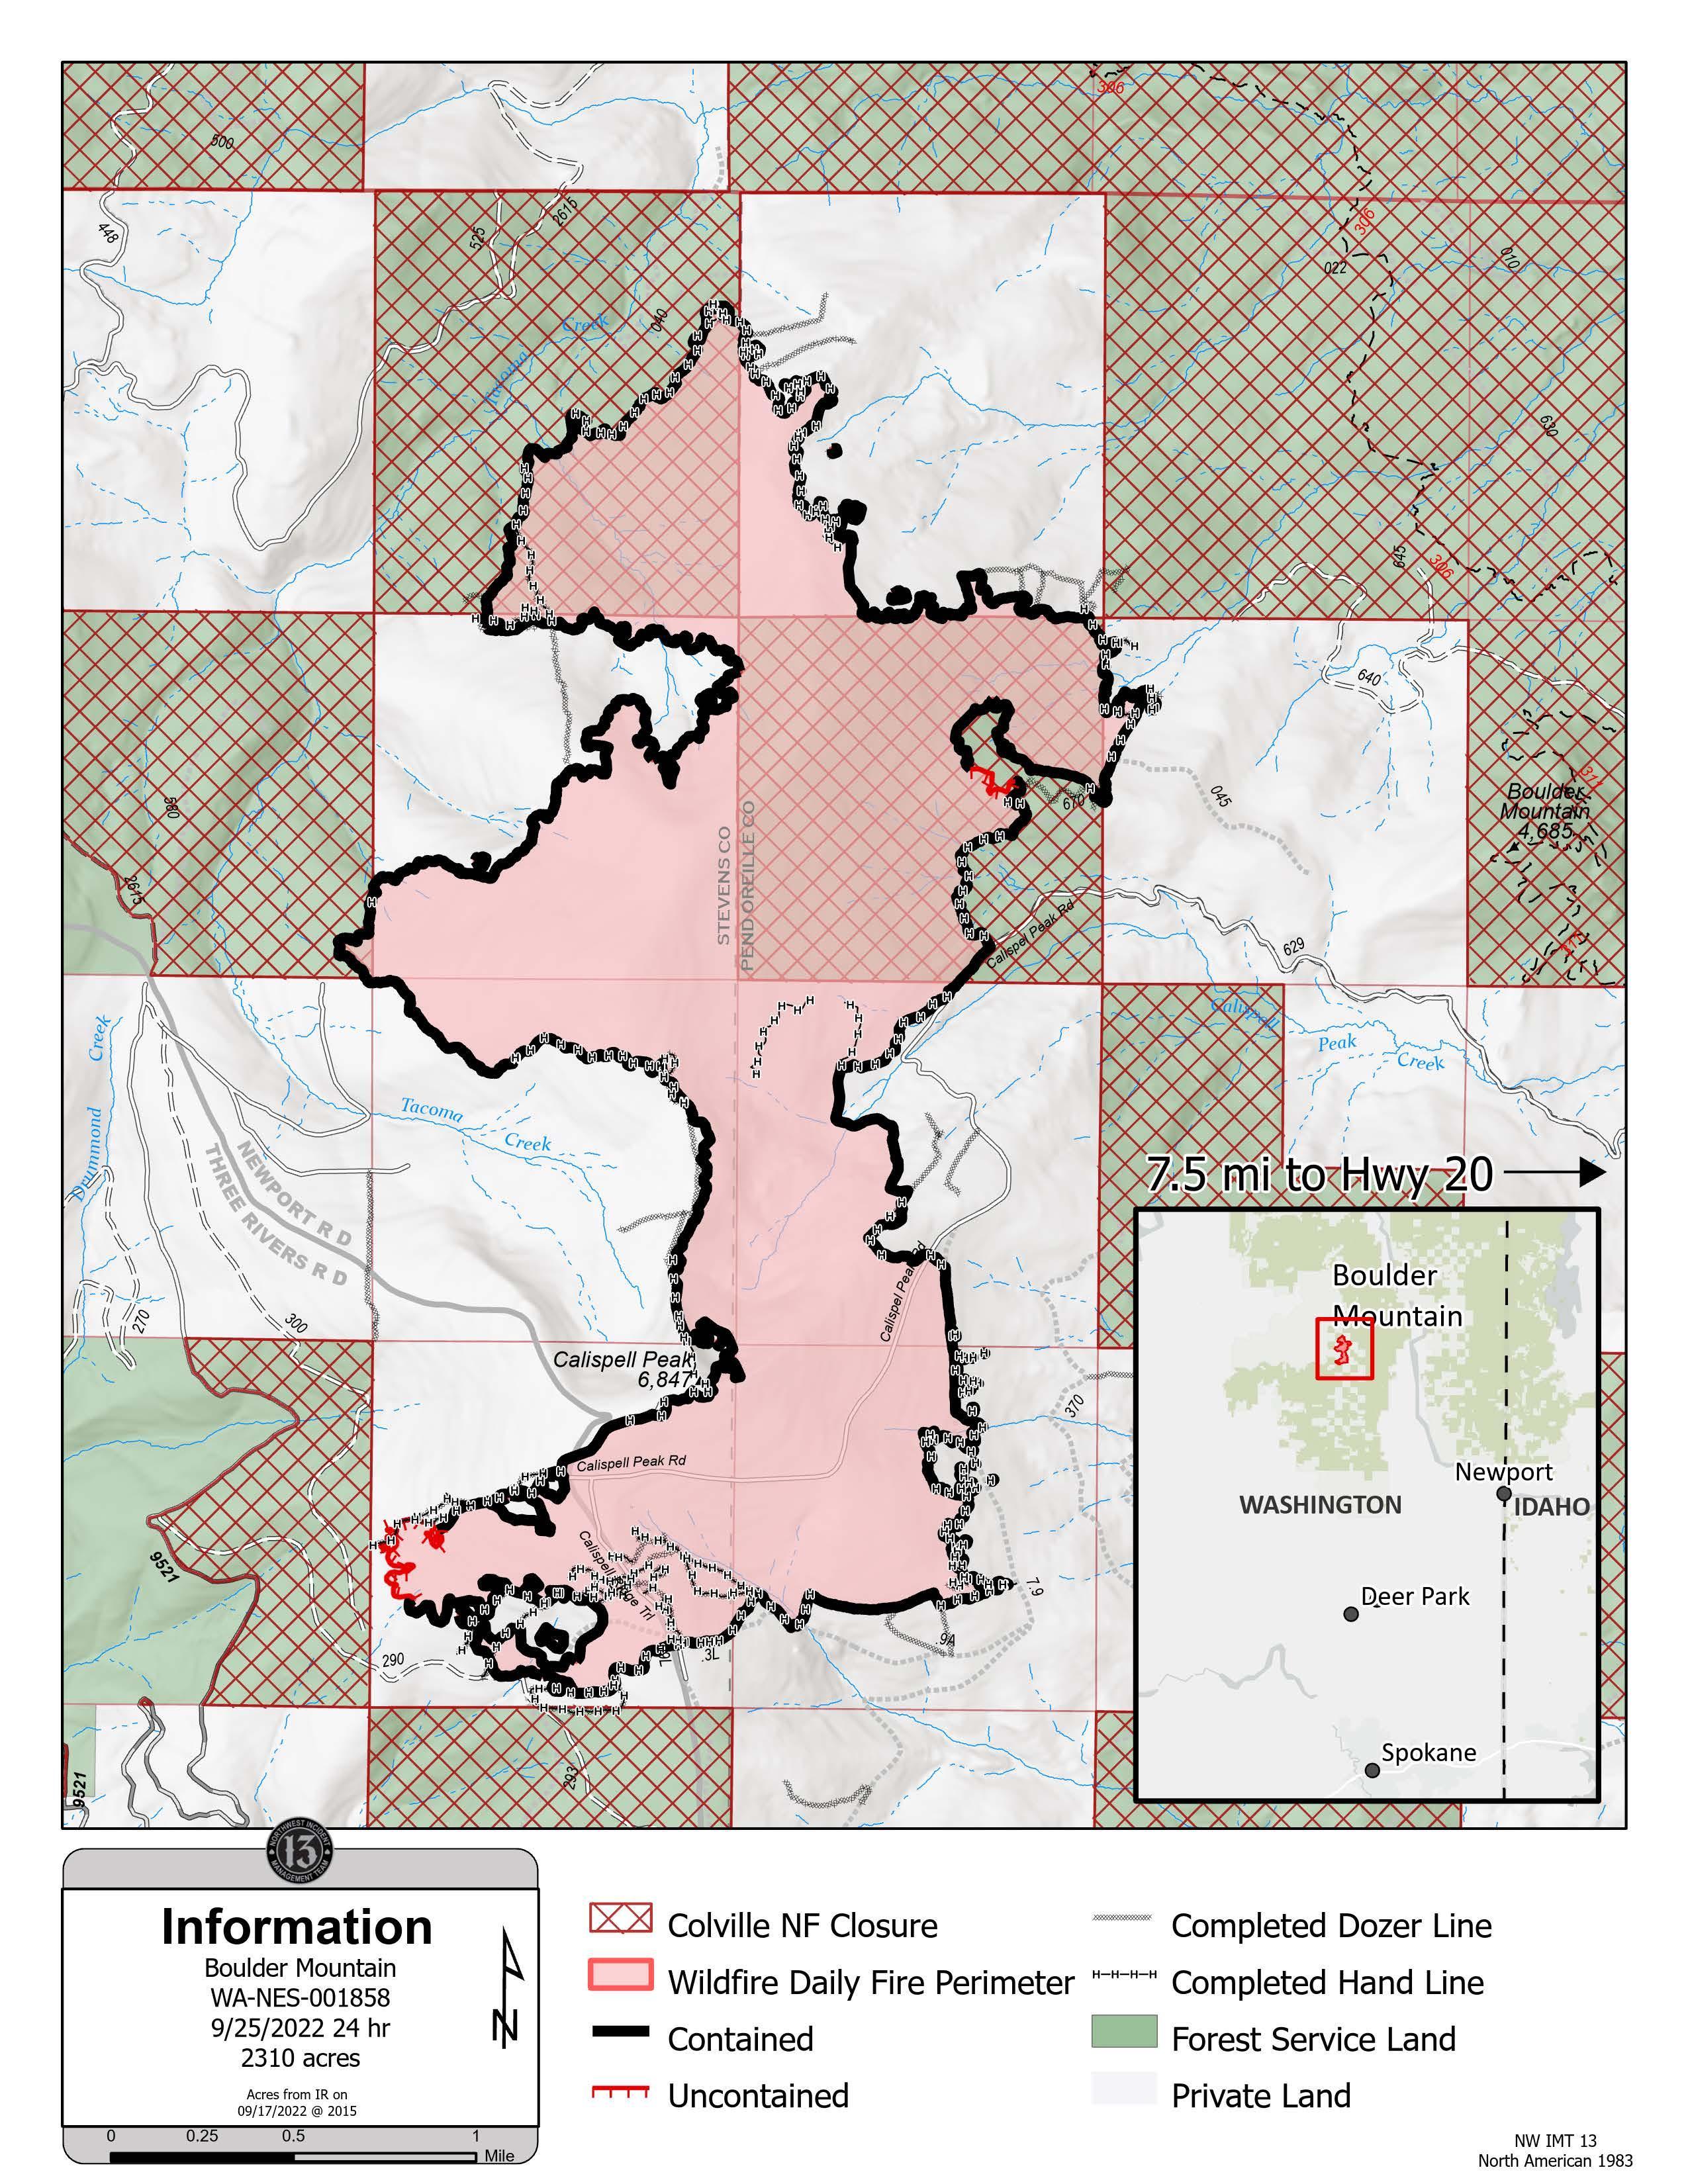 Boulder Mountain Fire map for Sunday, Sept. 25